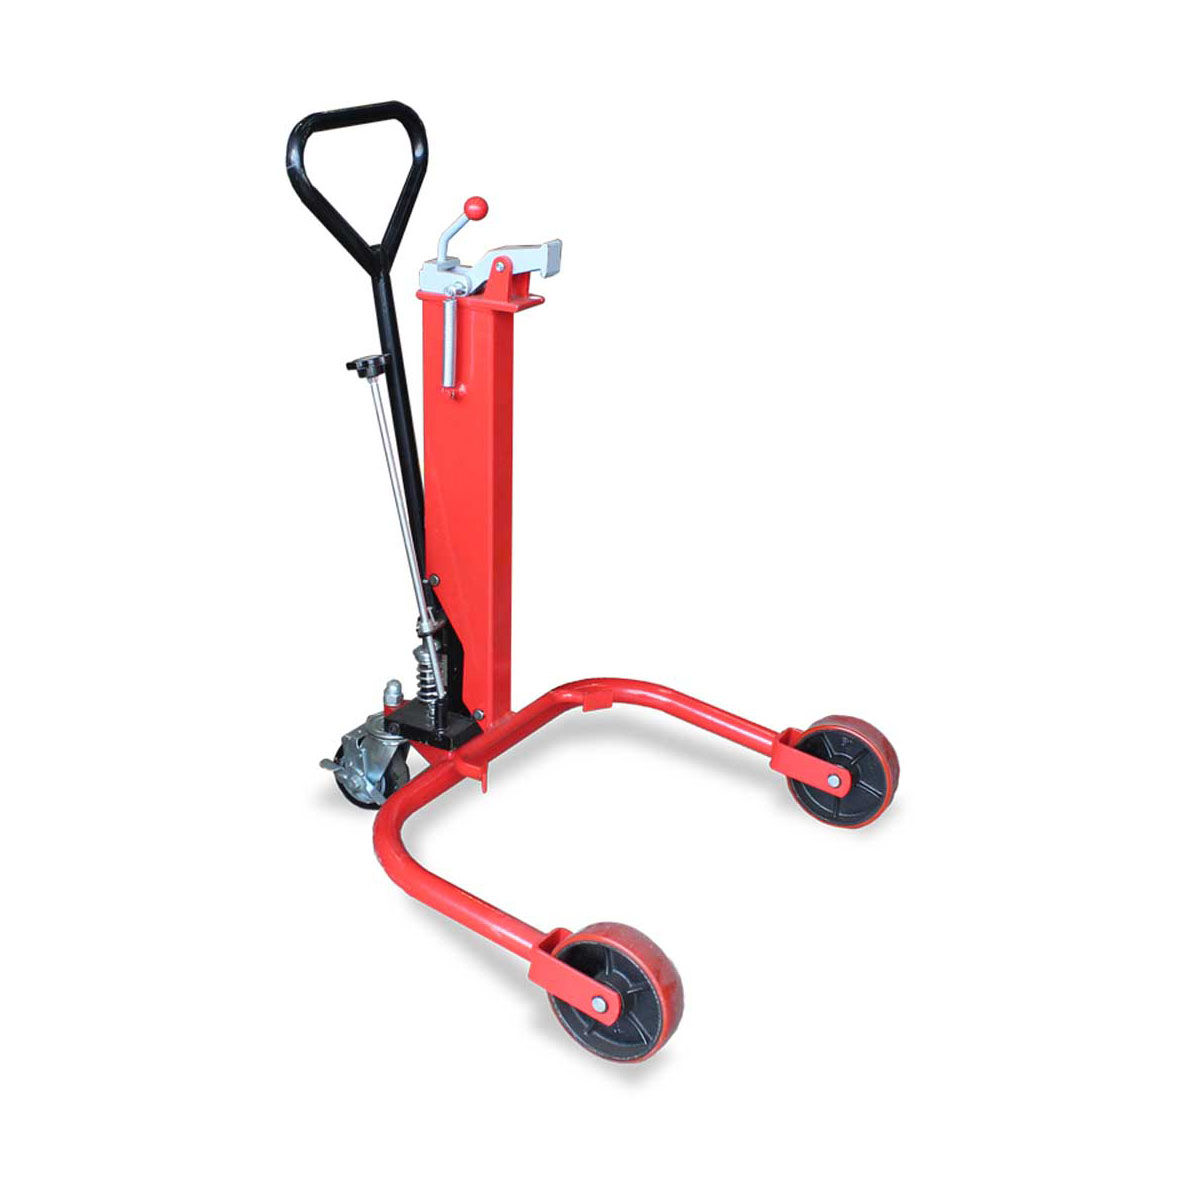 Buy Drum Lifter - Low available at Astrolift NZ